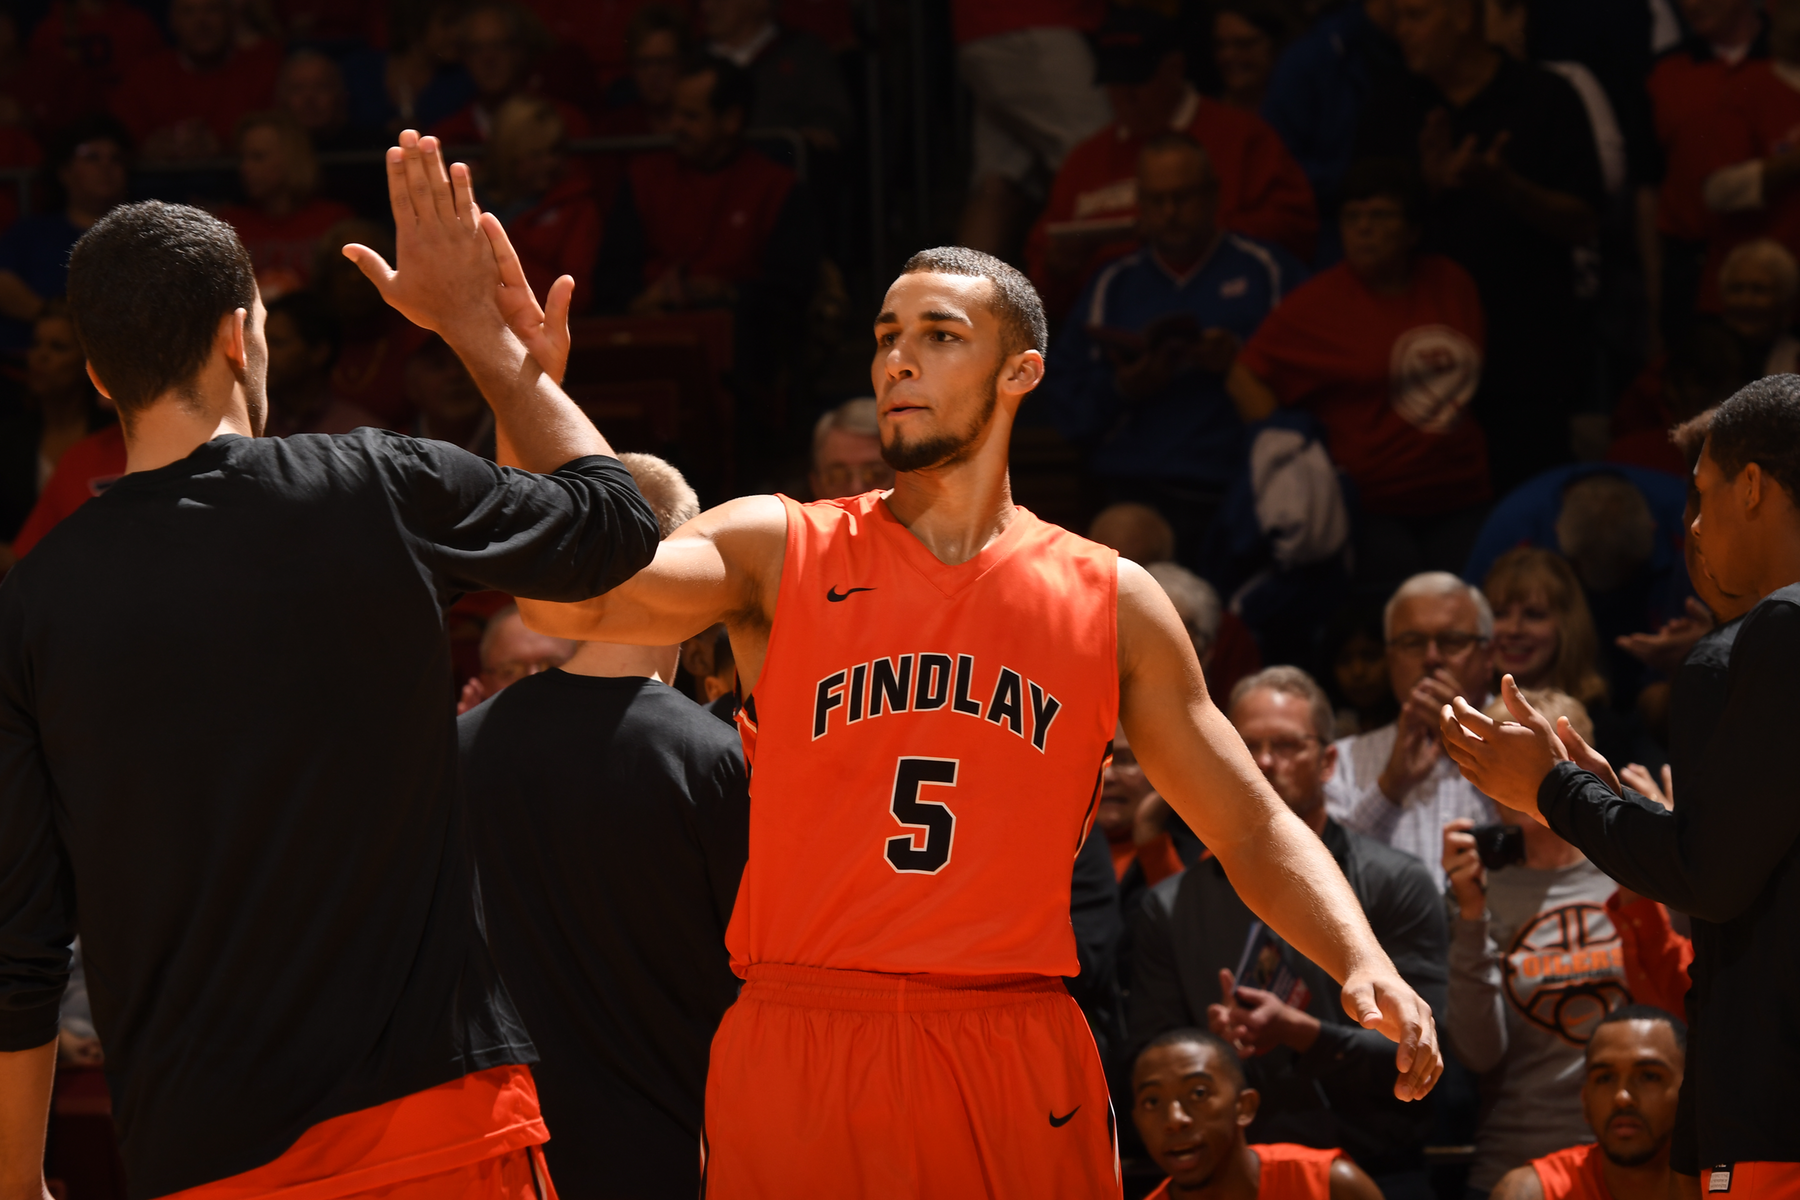 Oilers Fight Back for 82-79 Win at ODU